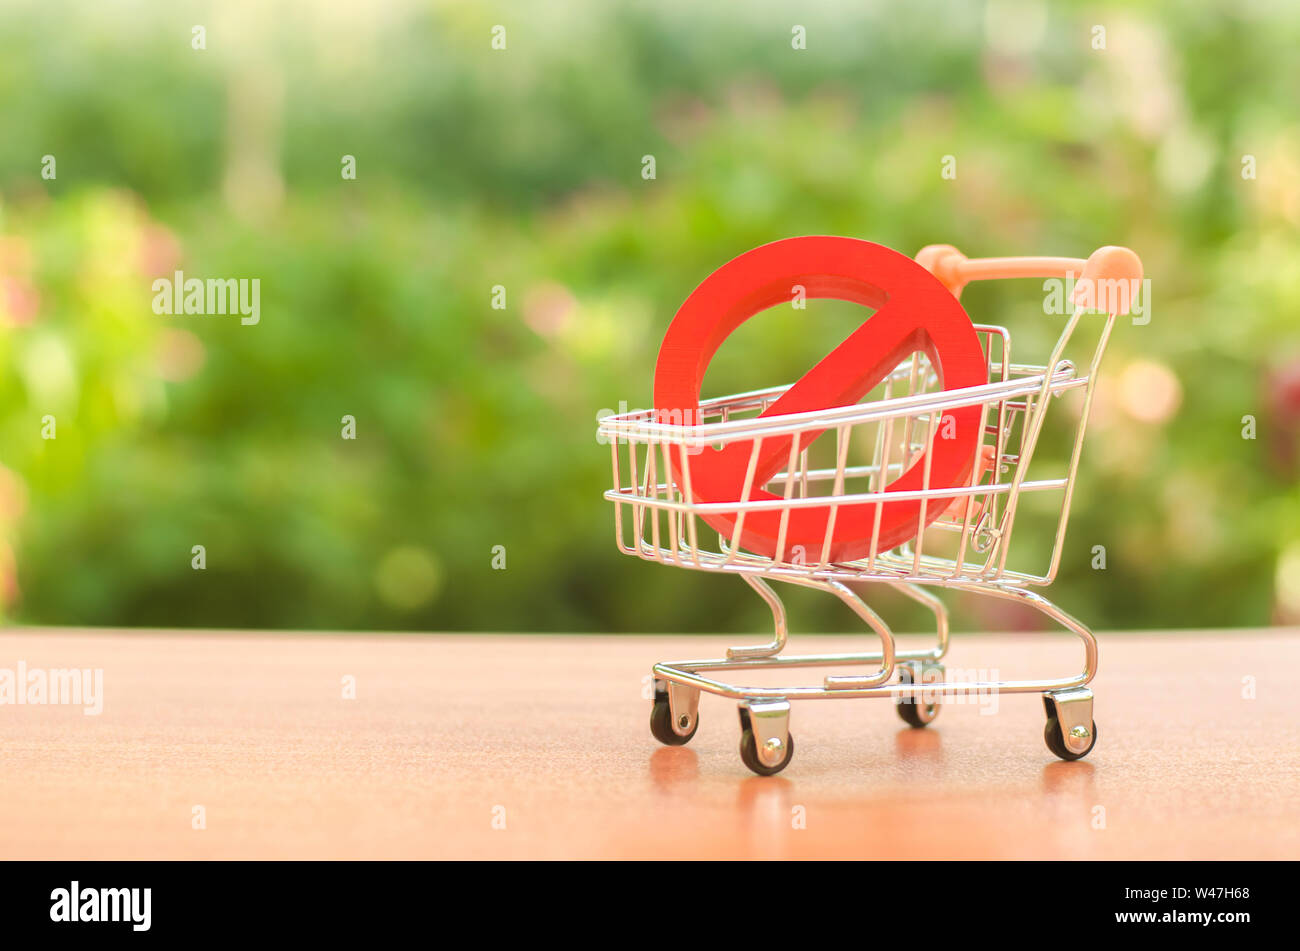 Red Prohibition symbol NO on a supermarket trading cart. Embargo, trade wars. Restriction on the importation of goods, proprietary for business. Inabi Stock Photo